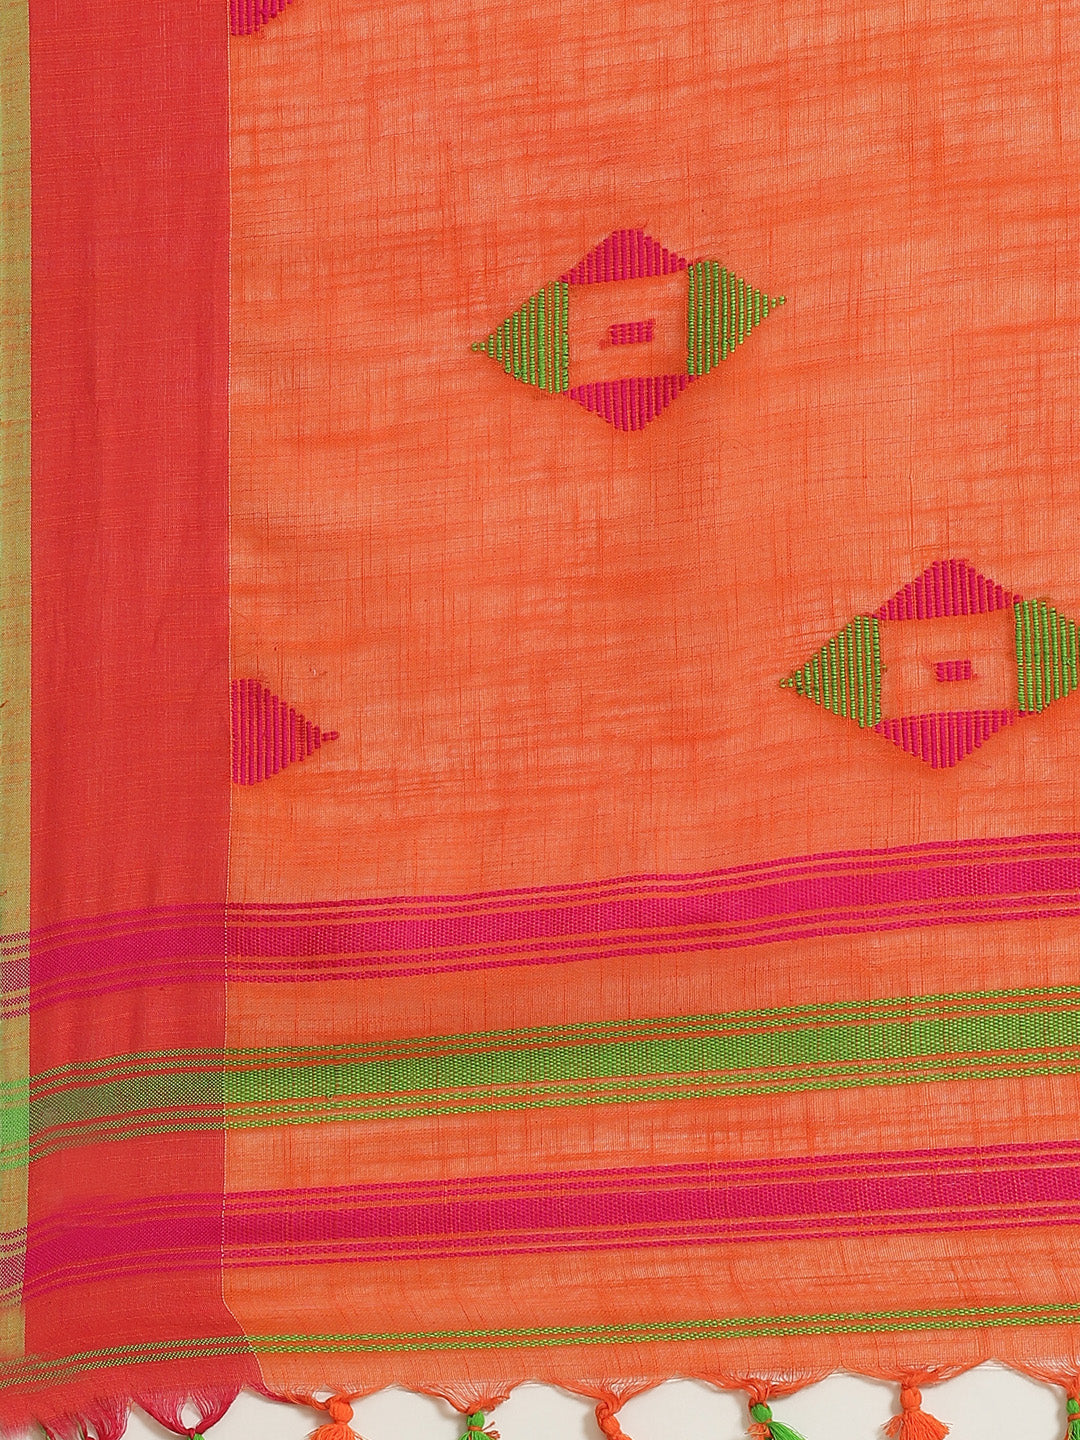 Orange and Green, Kalakari India Cotton Orange Hand crafted saree with blouse SHBESA0015-Saree-Kalakari India-SHBESA0015-Bengal, Cotton, Geographical Indication, Hand Crafted, Heritage Prints, Ikkat, Natural Dyes, Red, Sarees, Sustainable Fabrics, Woven, Yellow-[Linen,Ethnic,wear,Fashionista,Handloom,Handicraft,Indigo,blockprint,block,print,Cotton,Chanderi,Blue, latest,classy,party,bollywood,trendy,summer,style,traditional,formal,elegant,unique,style,hand,block,print, dabu,booti,gift,present,gla